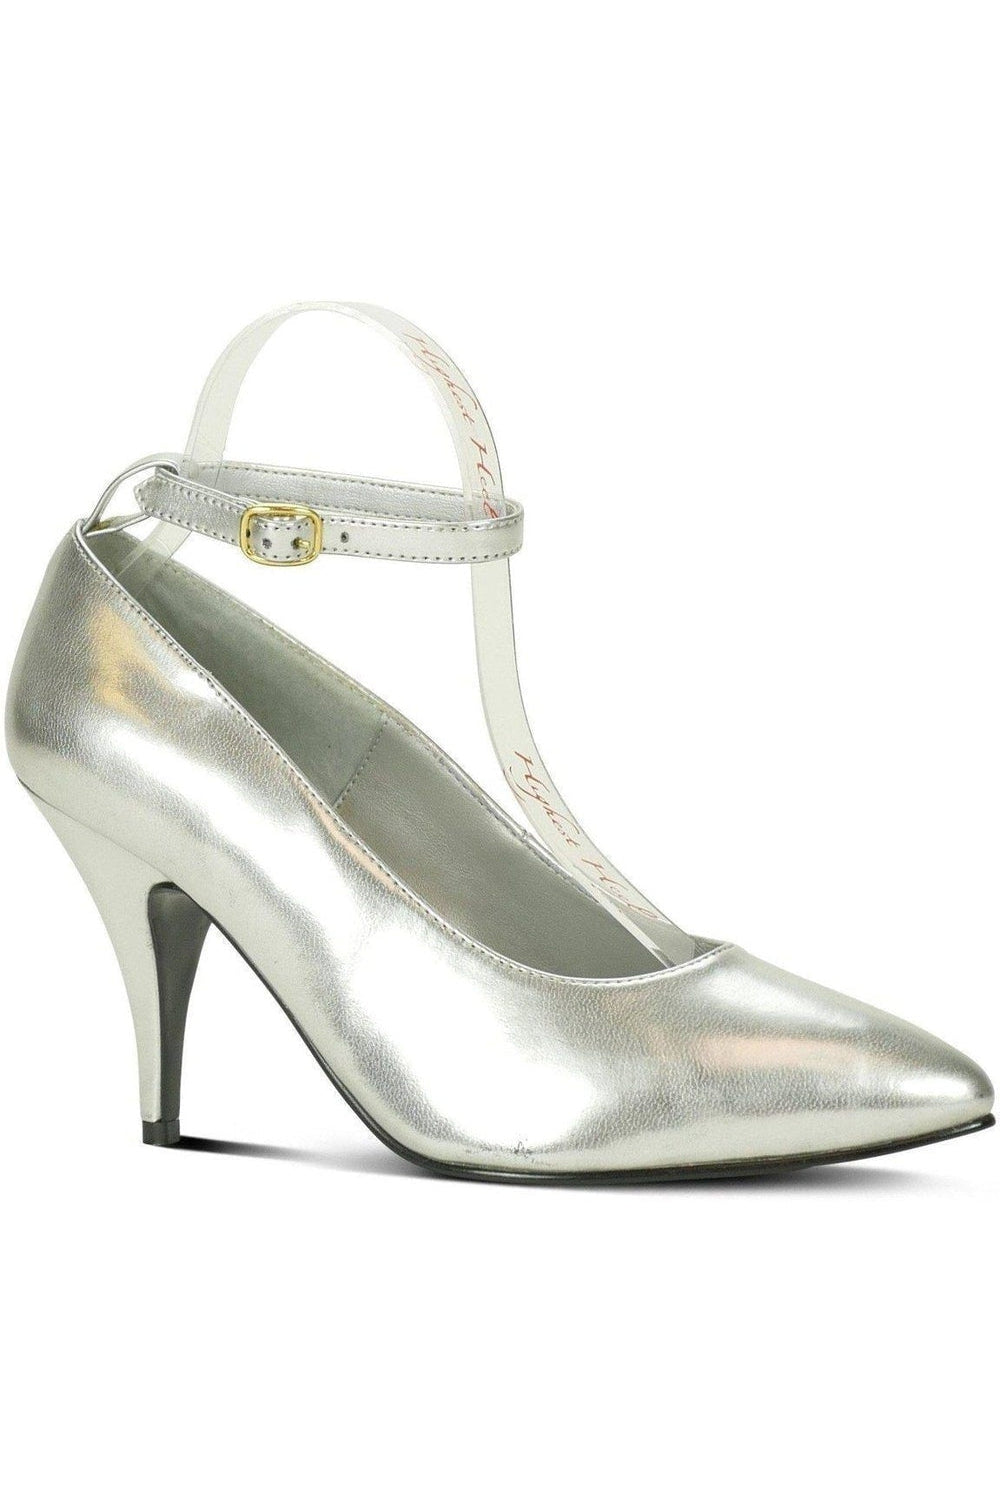 Ankle Strap - Silver-Sexyshoes Brand-SILVER-Pumps-SEXYSHOES.COM